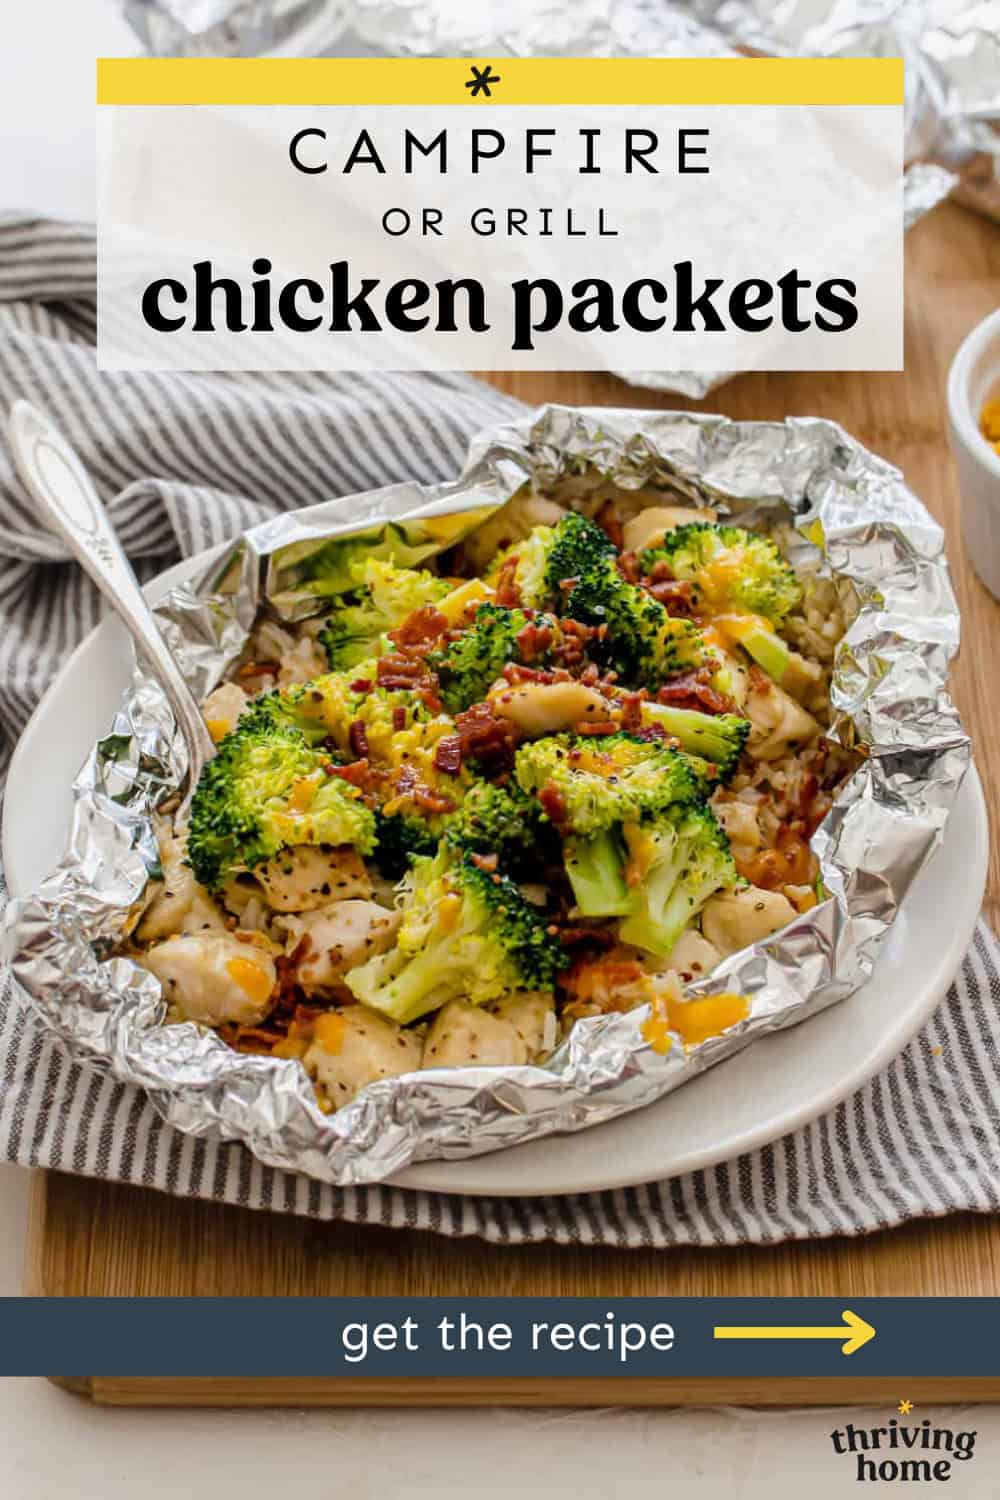 Broccoli, chicken, rice, cheese and bacon cooked in a foil packet that is open on a plate.